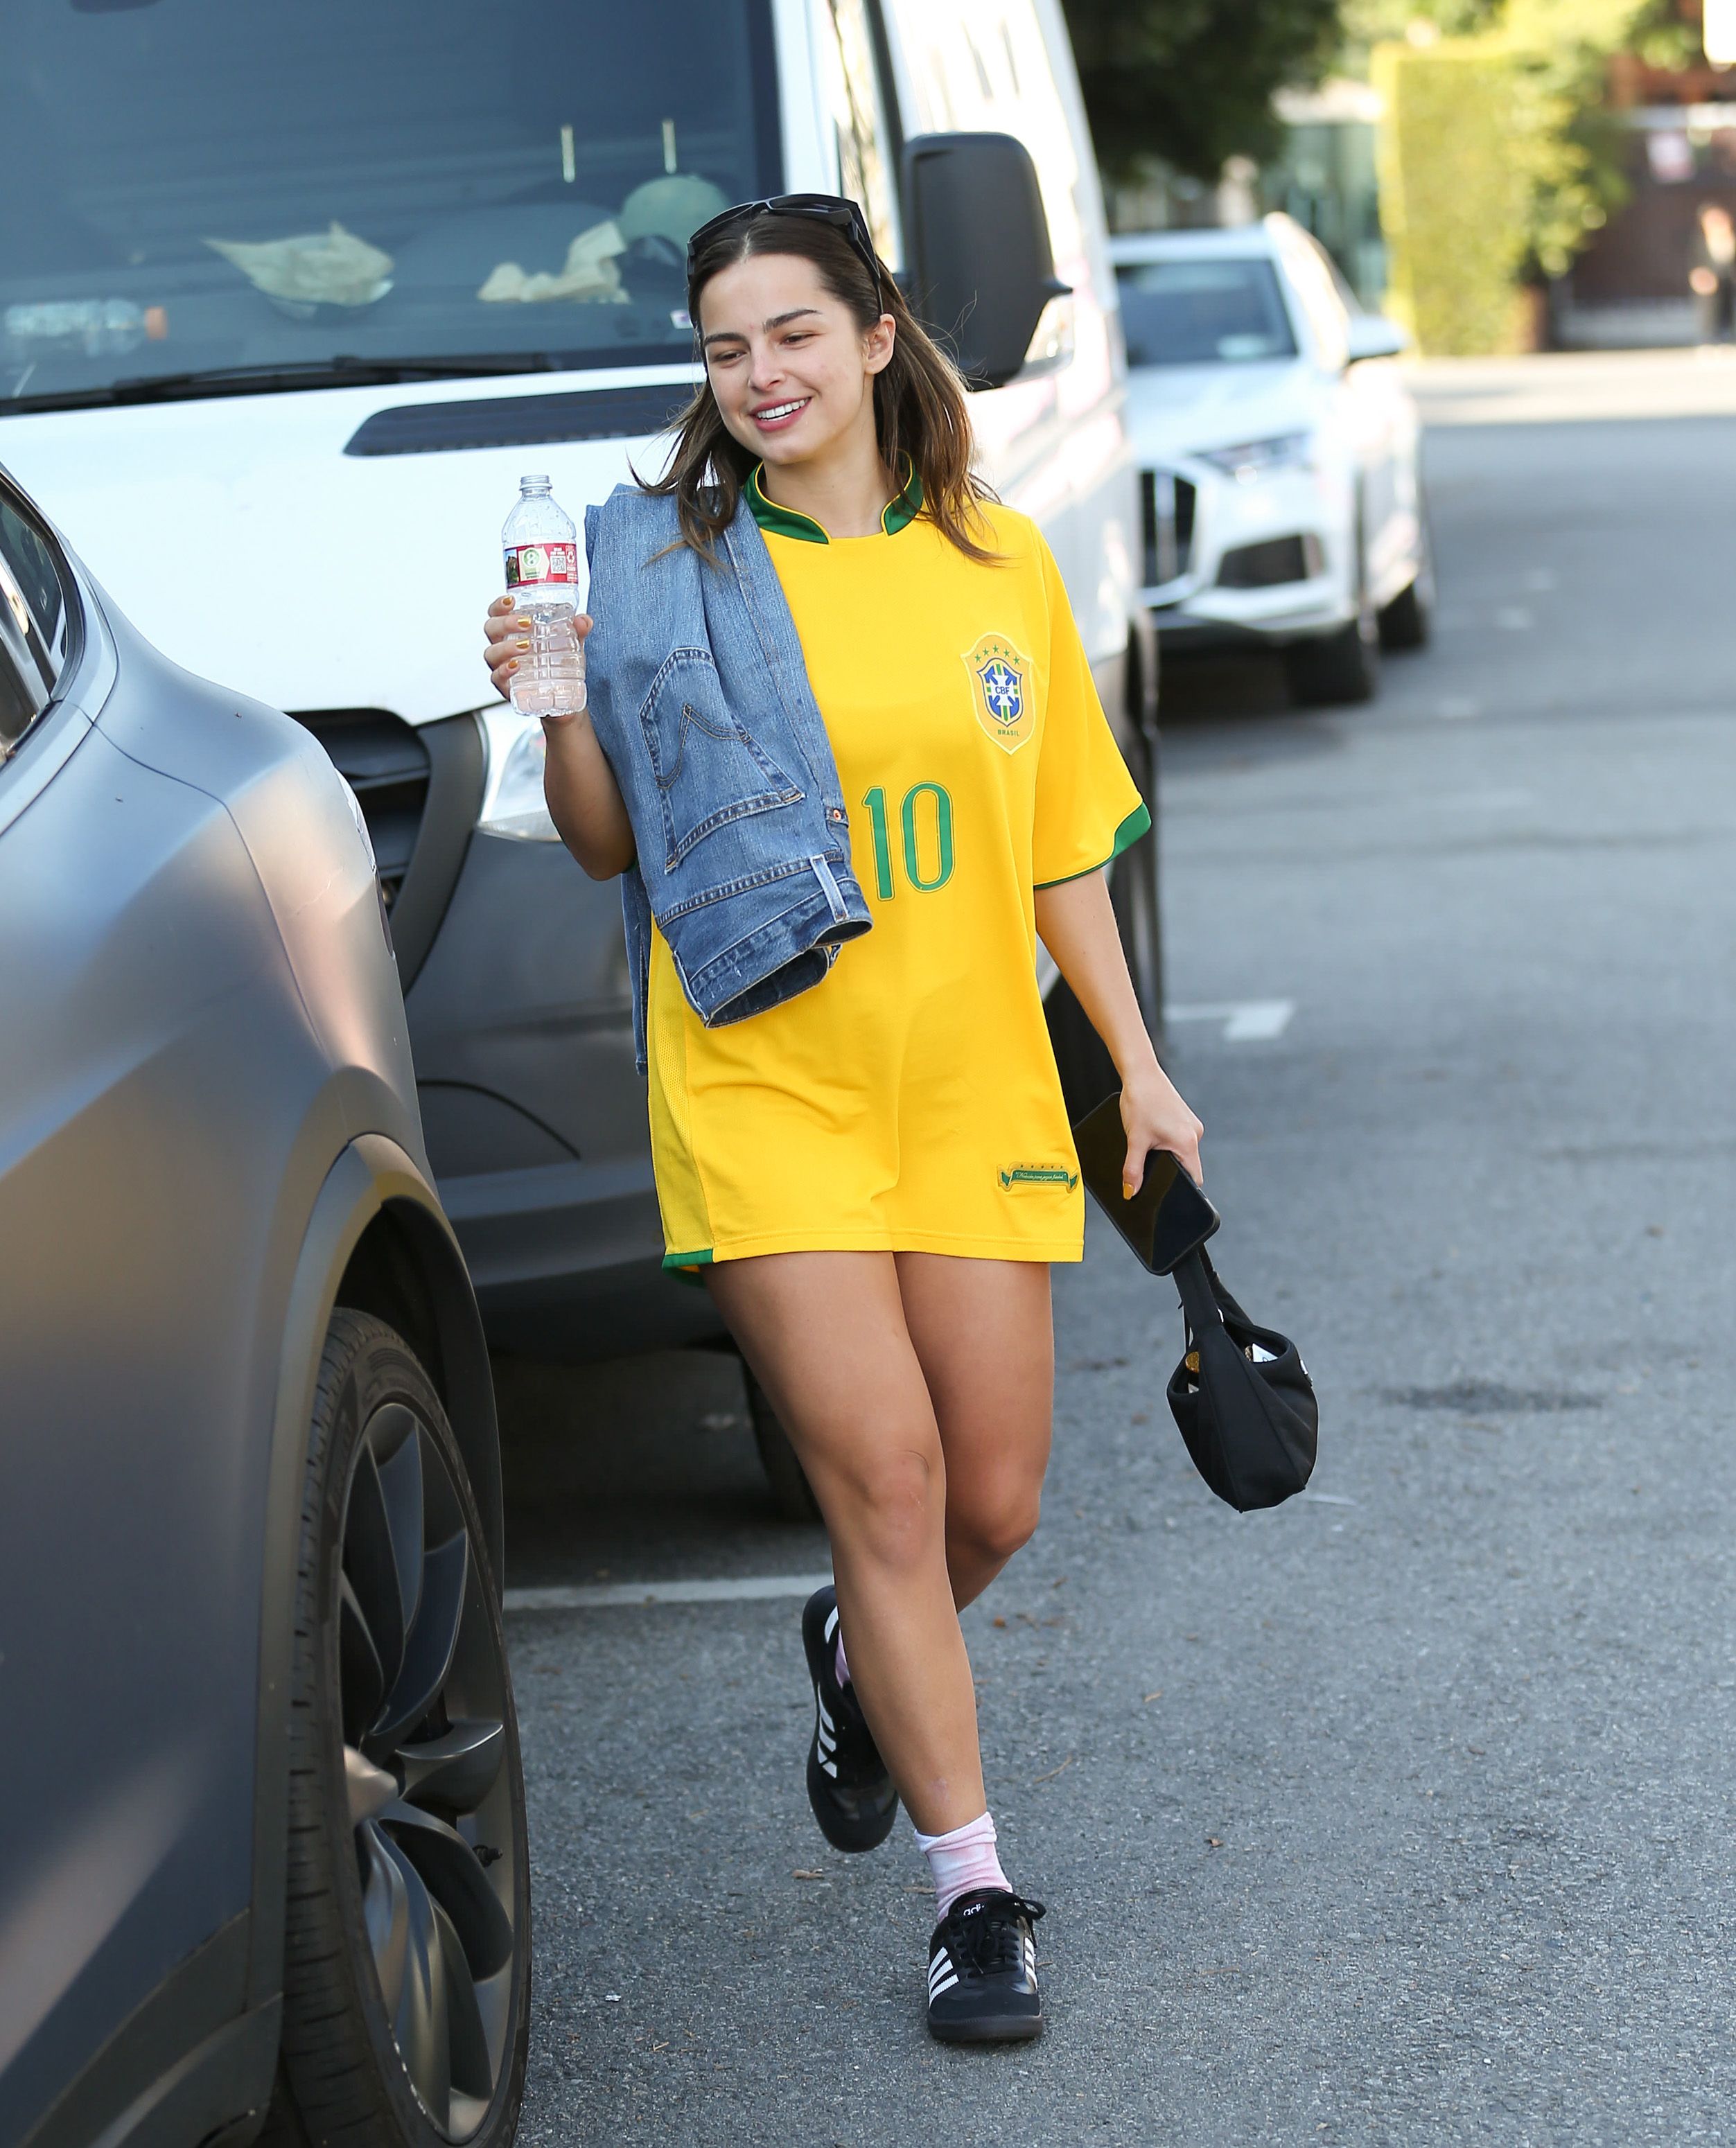 Sports Jerseys Are the Hottest Celebrity Fall Trend